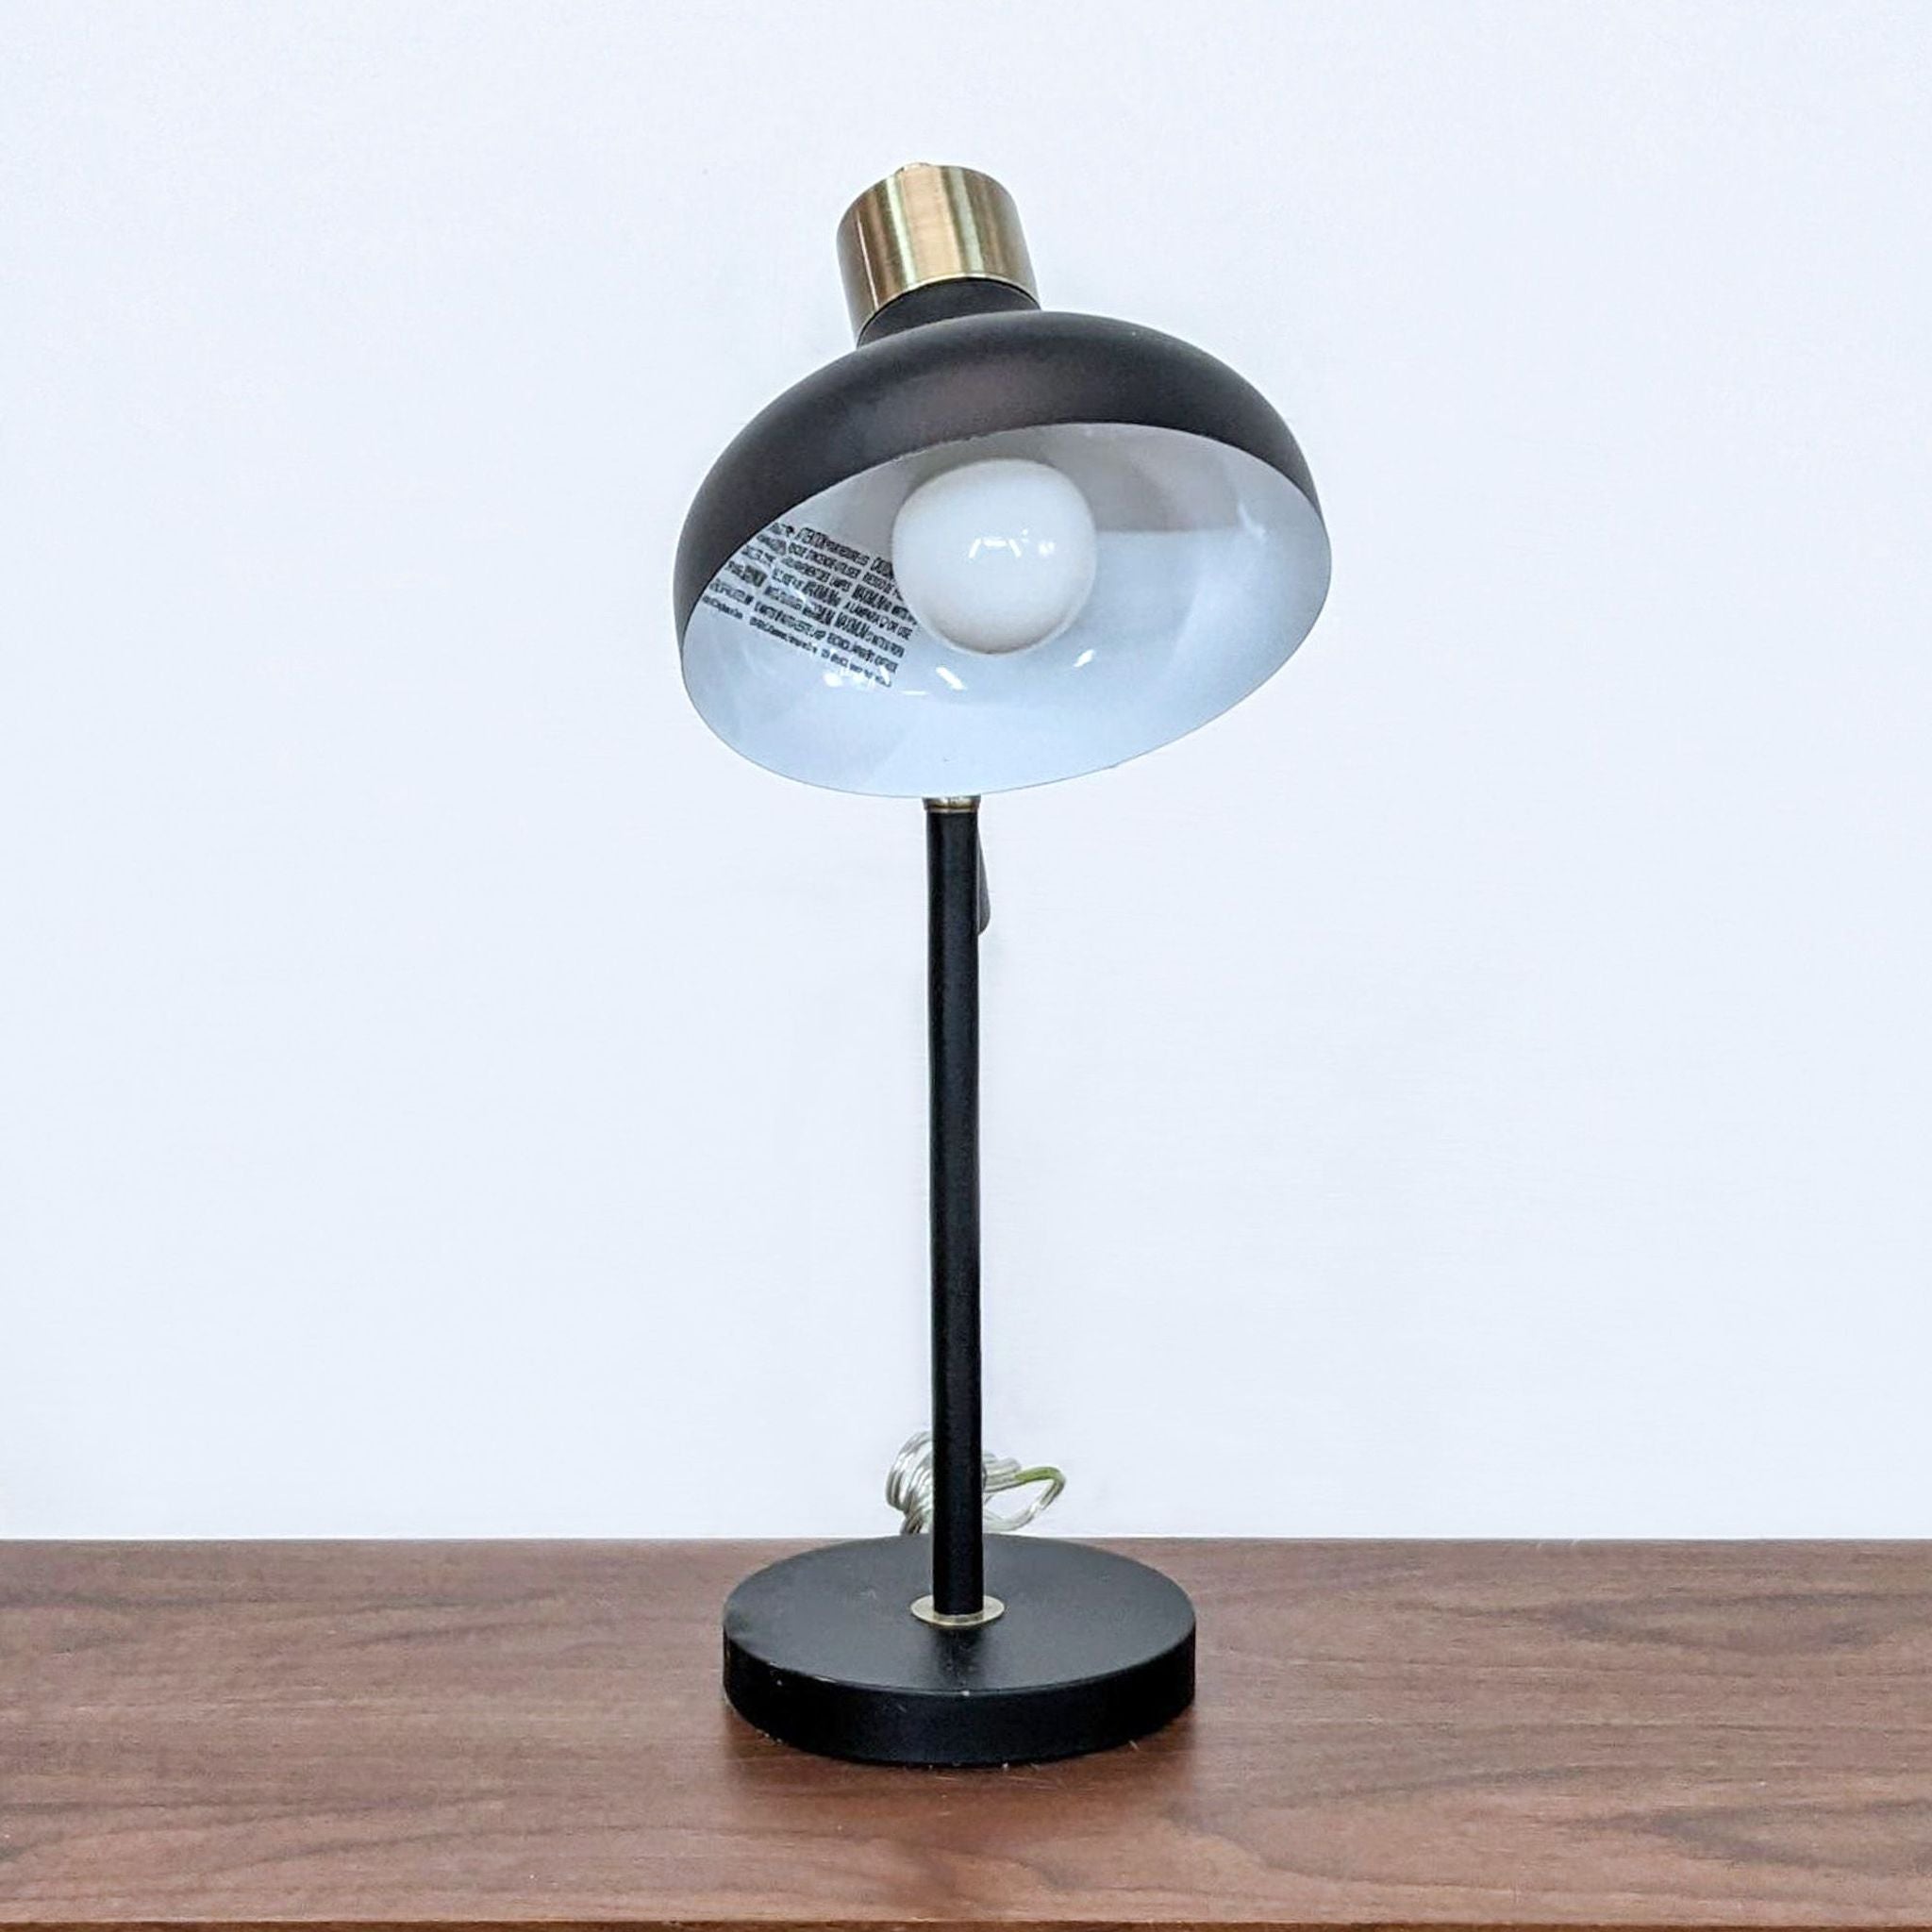 Elegant Reperch desk light featuring brass fixtures and a translucent glass bulb cover, displayed on a wooden surface.